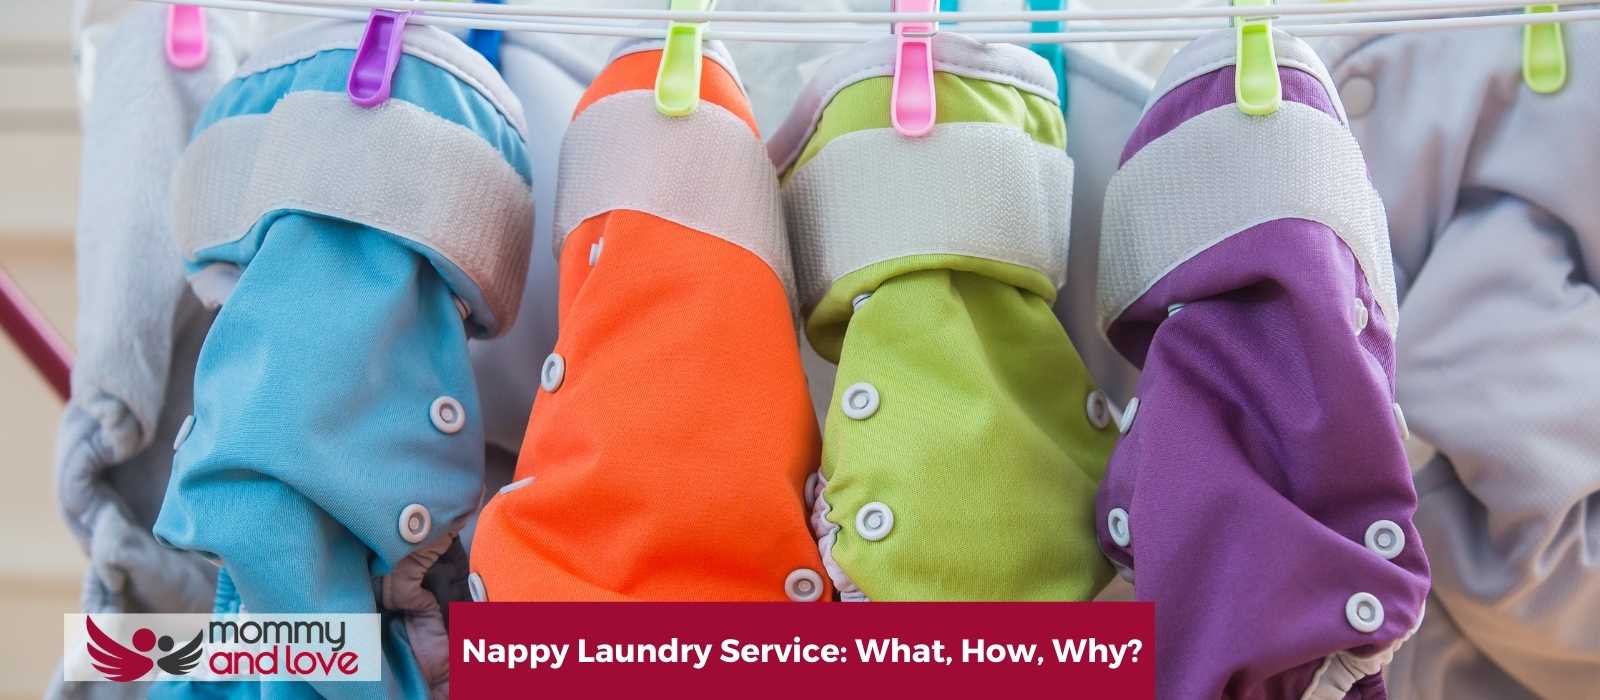 Nappy Laundry Service What, How, Why